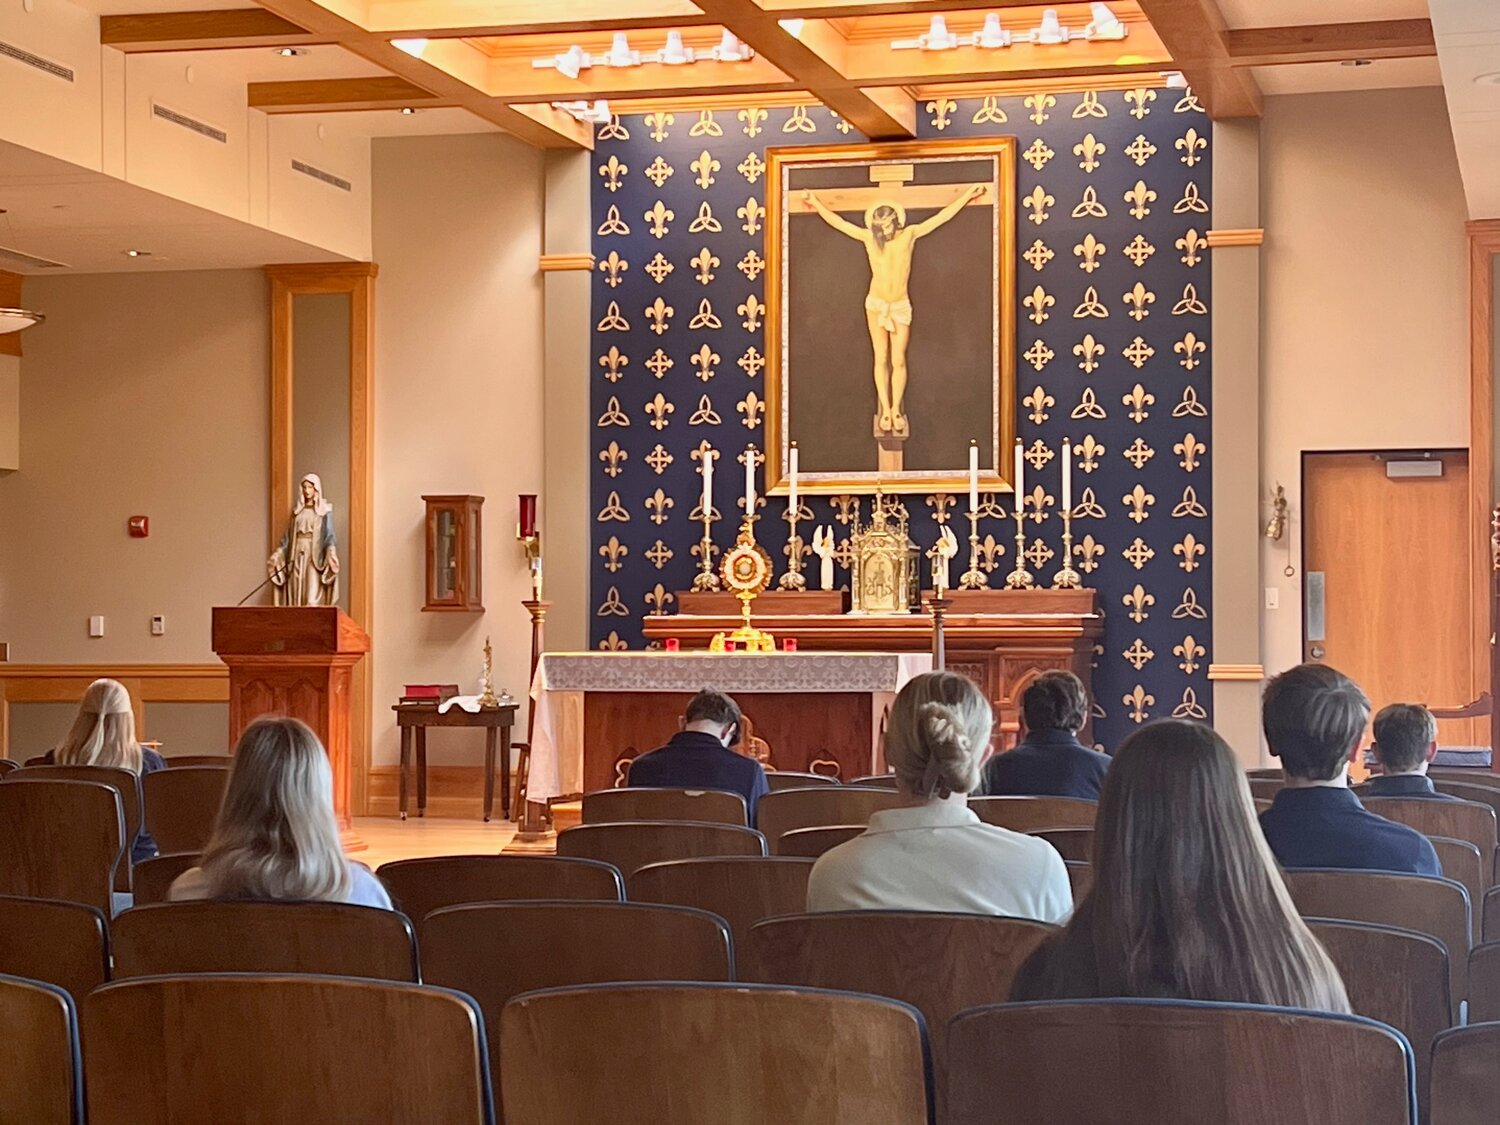 Students spent time in silent prayer before the Most Blessed Sacrament in the chapel of Helias Catholic High School in Jefferson City during the Oct. 17 day of prayer and fasting for peace in the Holy Land.